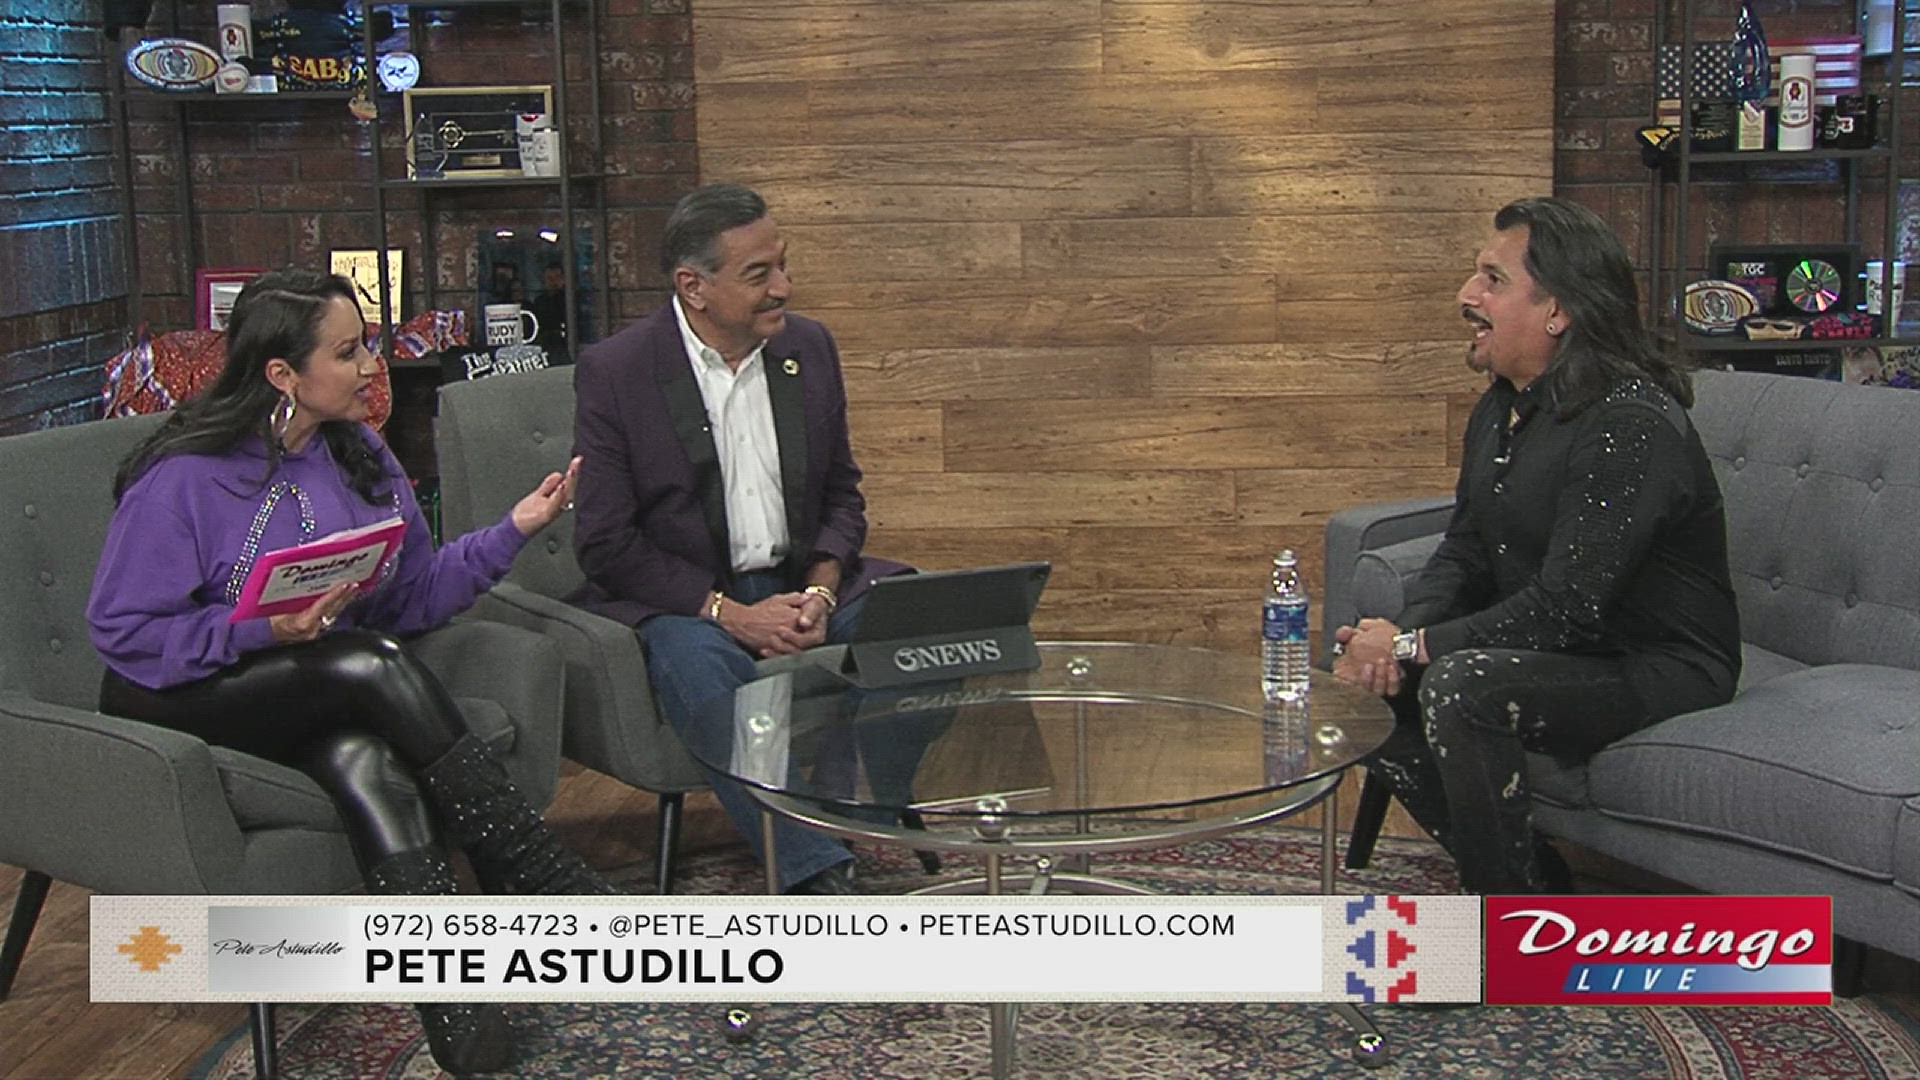 Pete Astudillo joined us on Domingo Live to discuss how his upcoming single pays homage to his parents' roots and musical influences.